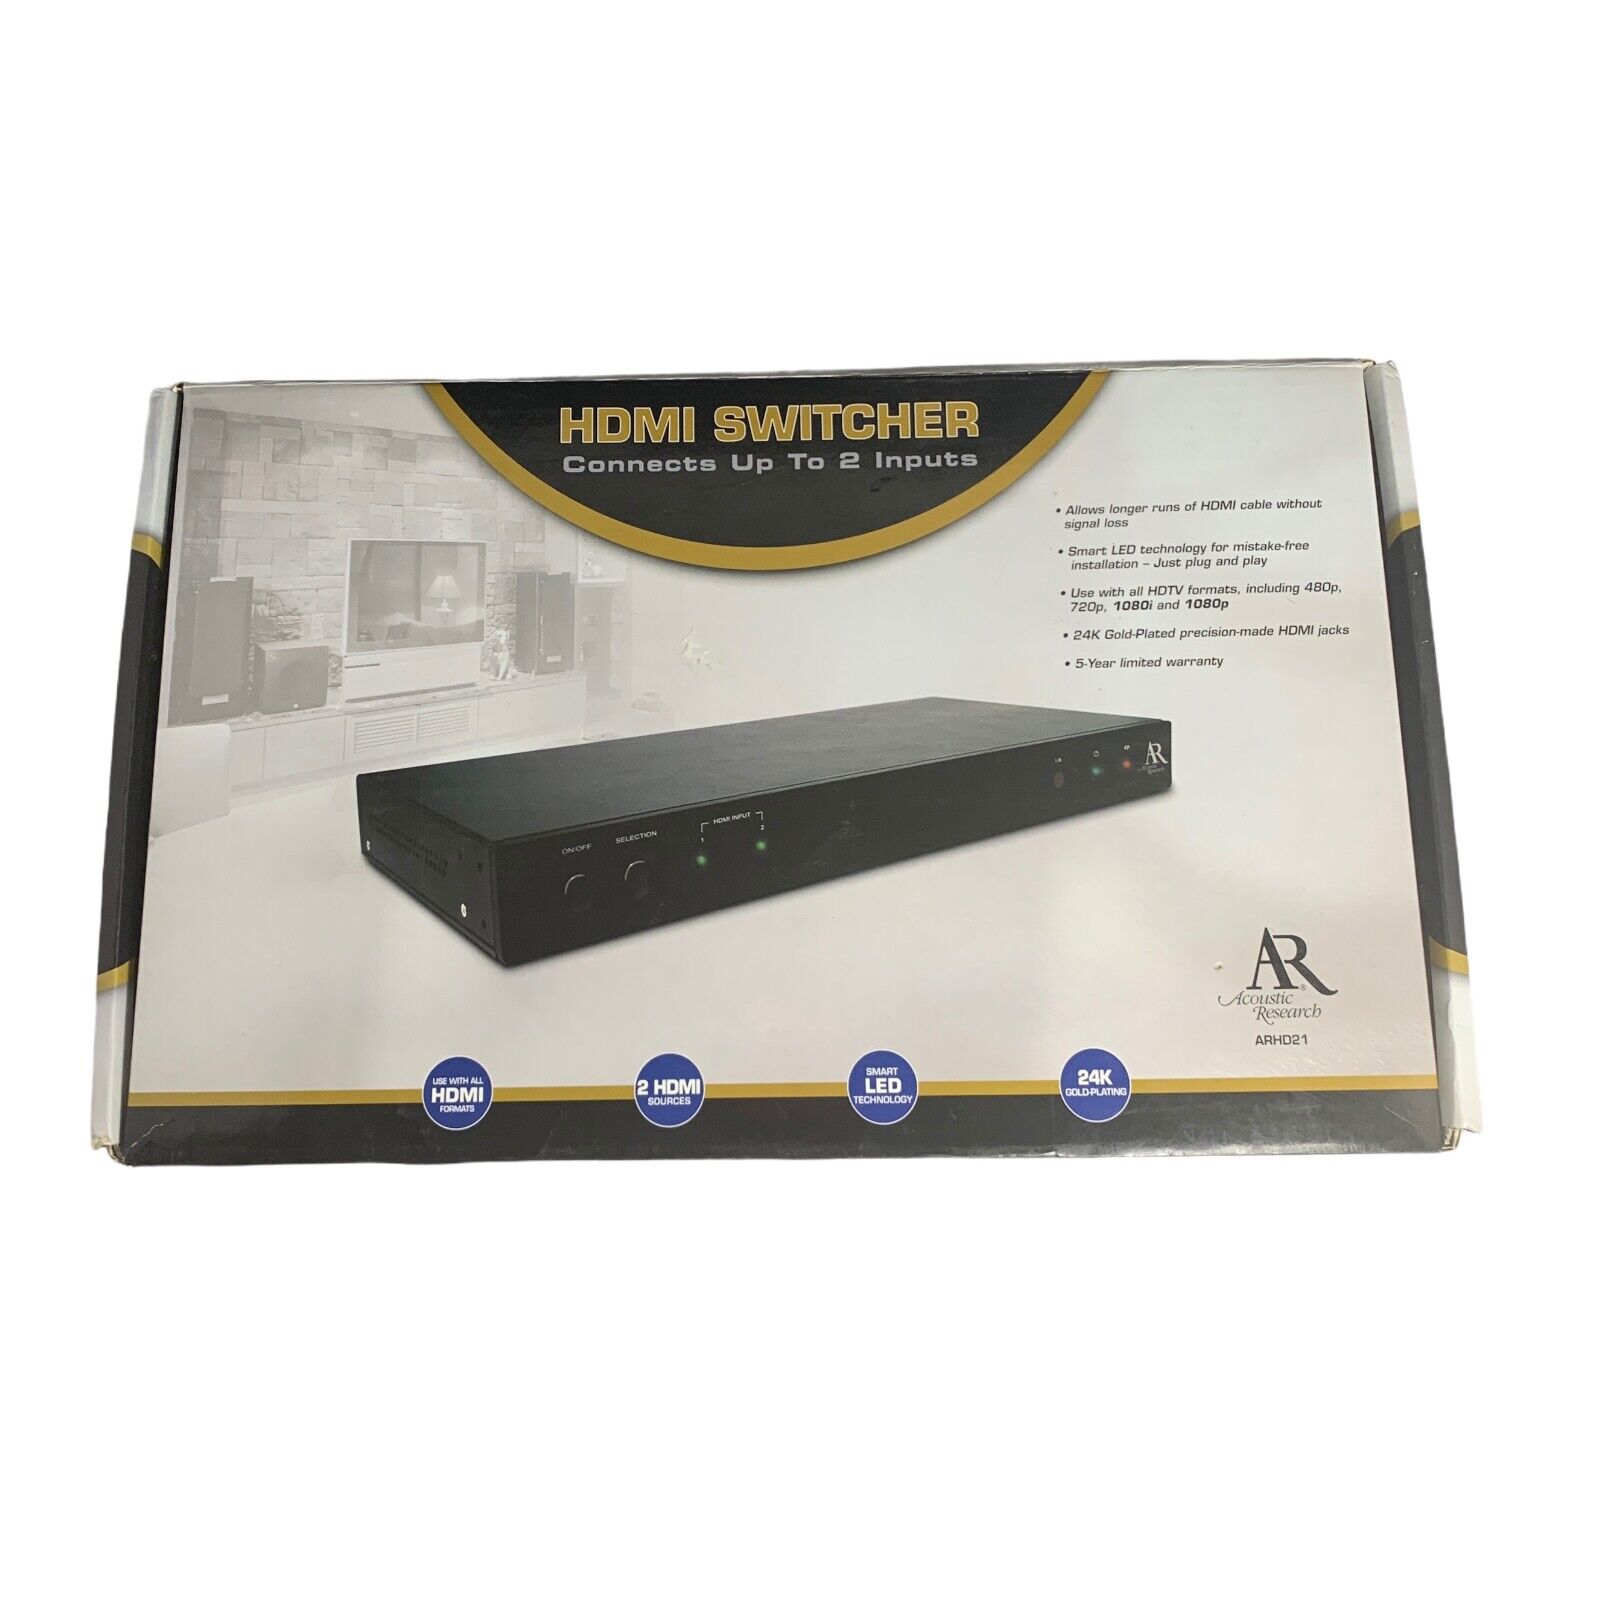 Acoustic Research - 2006 HDMI Switcher - Model: ARHD21